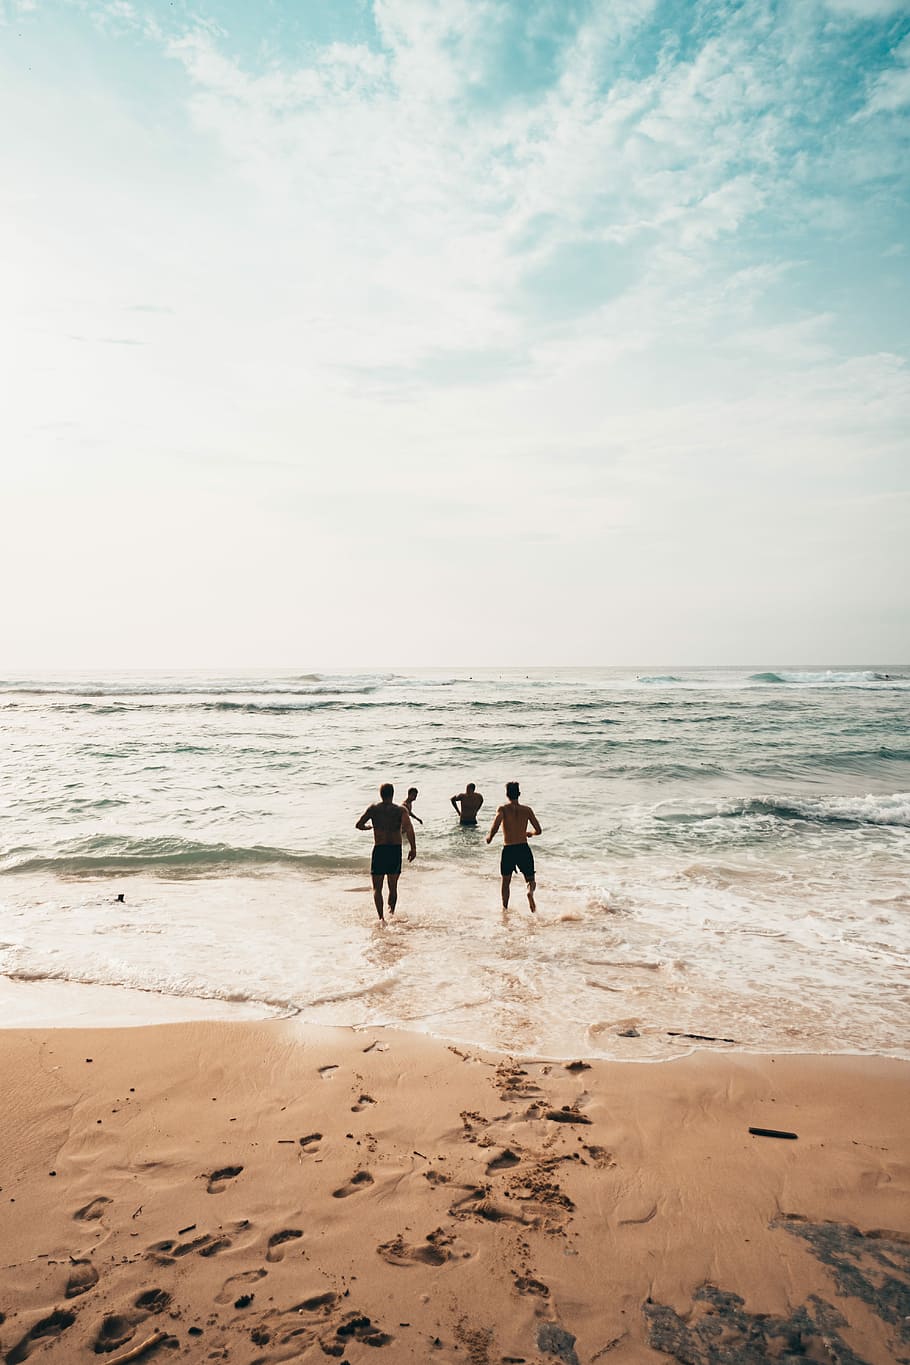 four person on beach during daytime, sand, sea, water, seashore